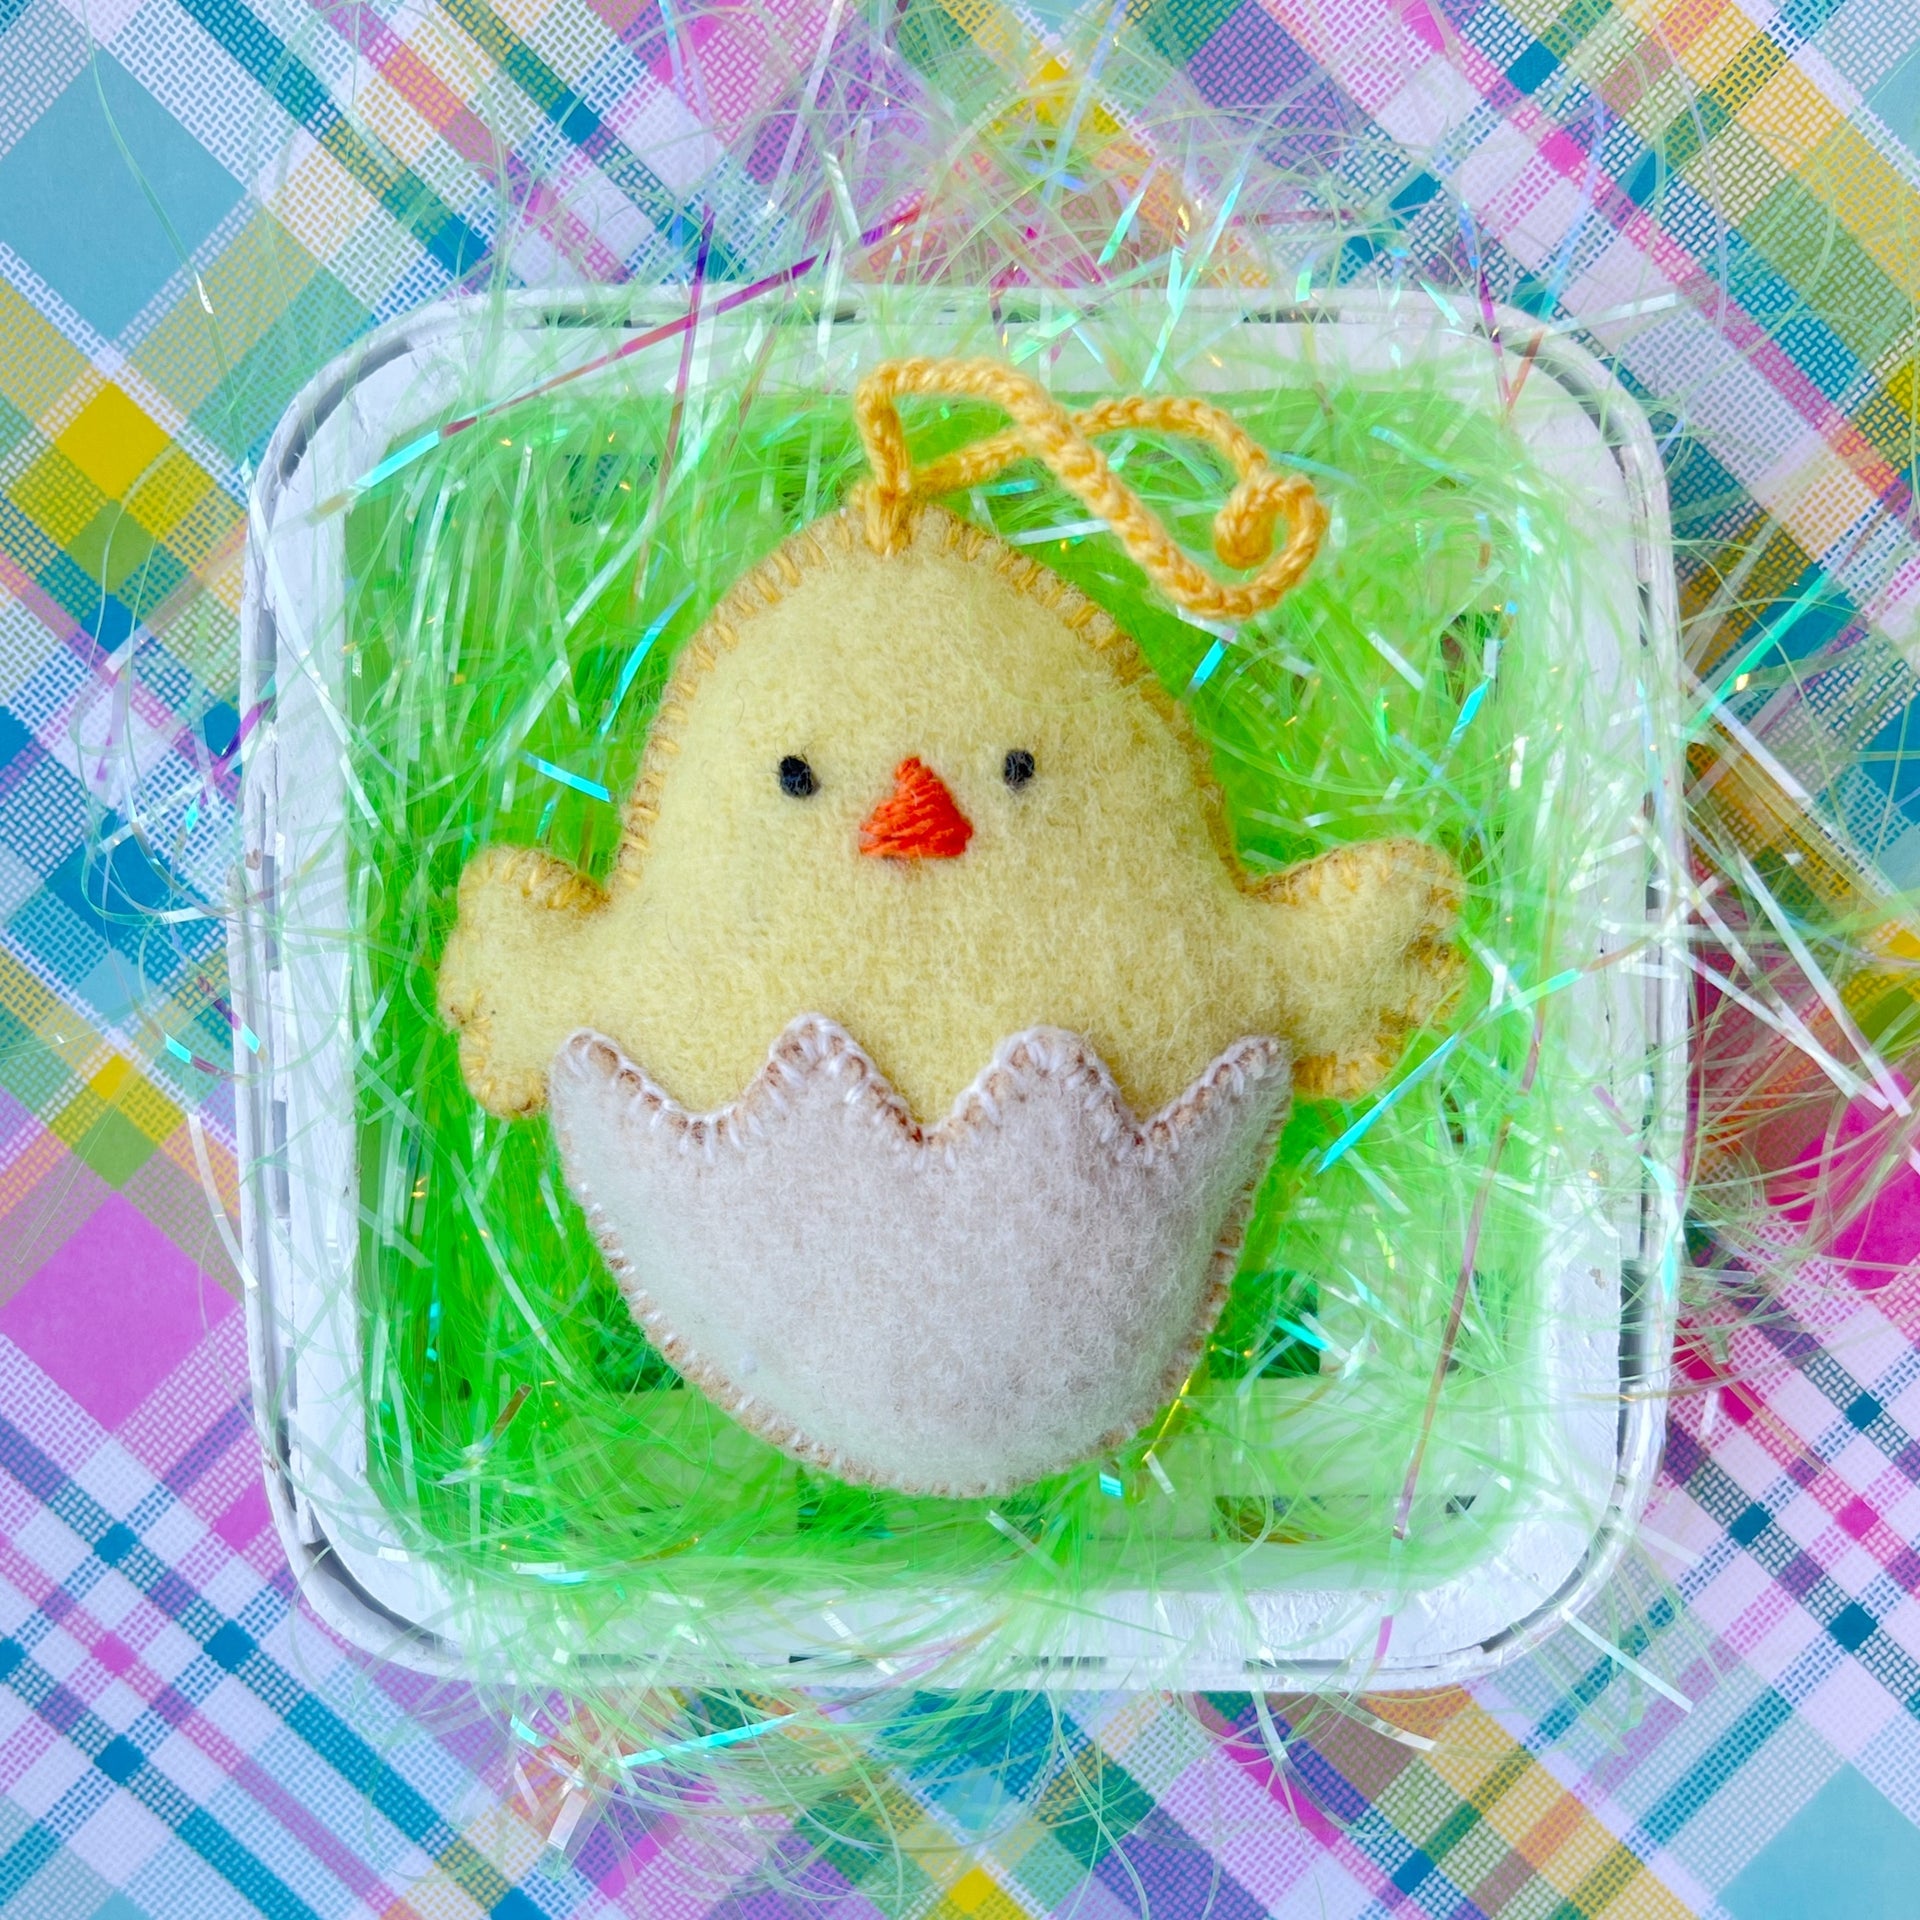 Baby chick Easter ornament resting in a basket of grass.